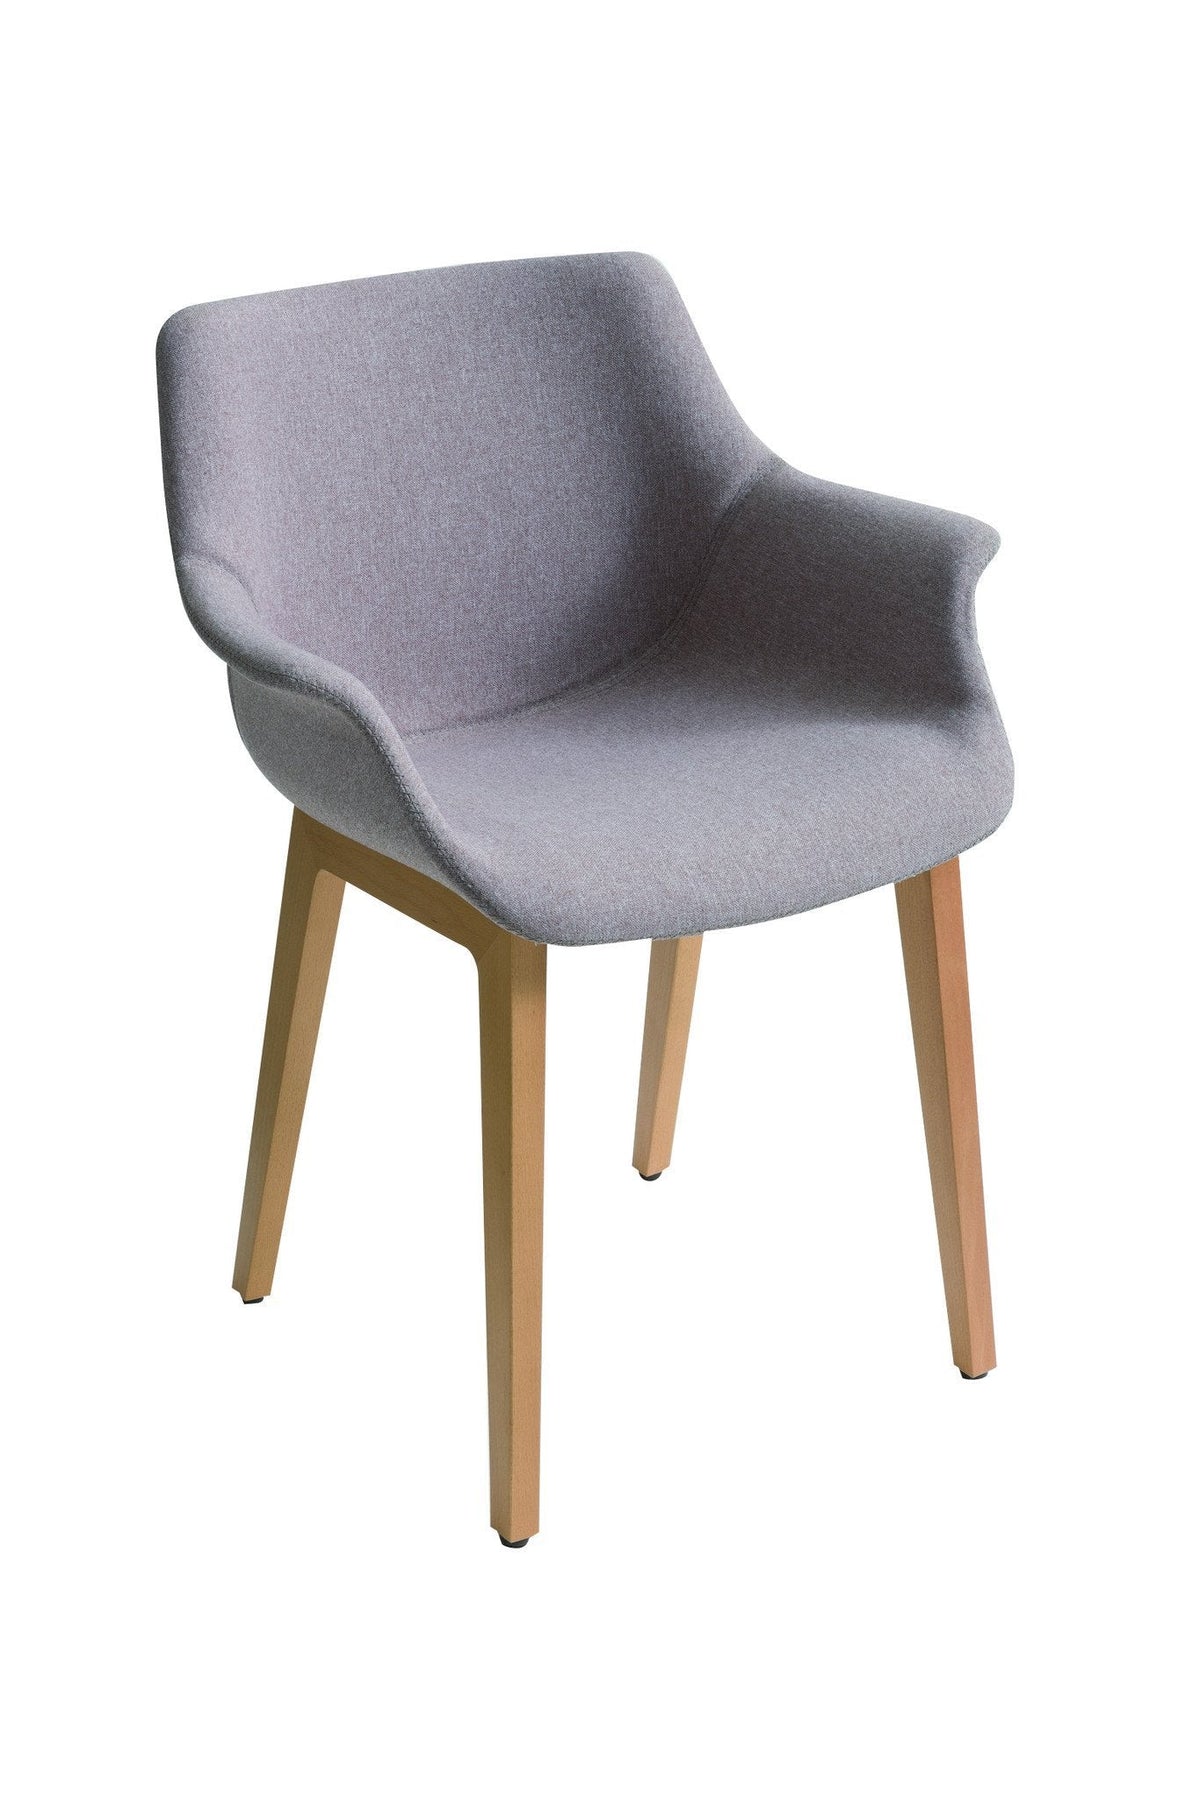 More Side Chair c/w Wood Legs-Gaber-Contract Furniture Store